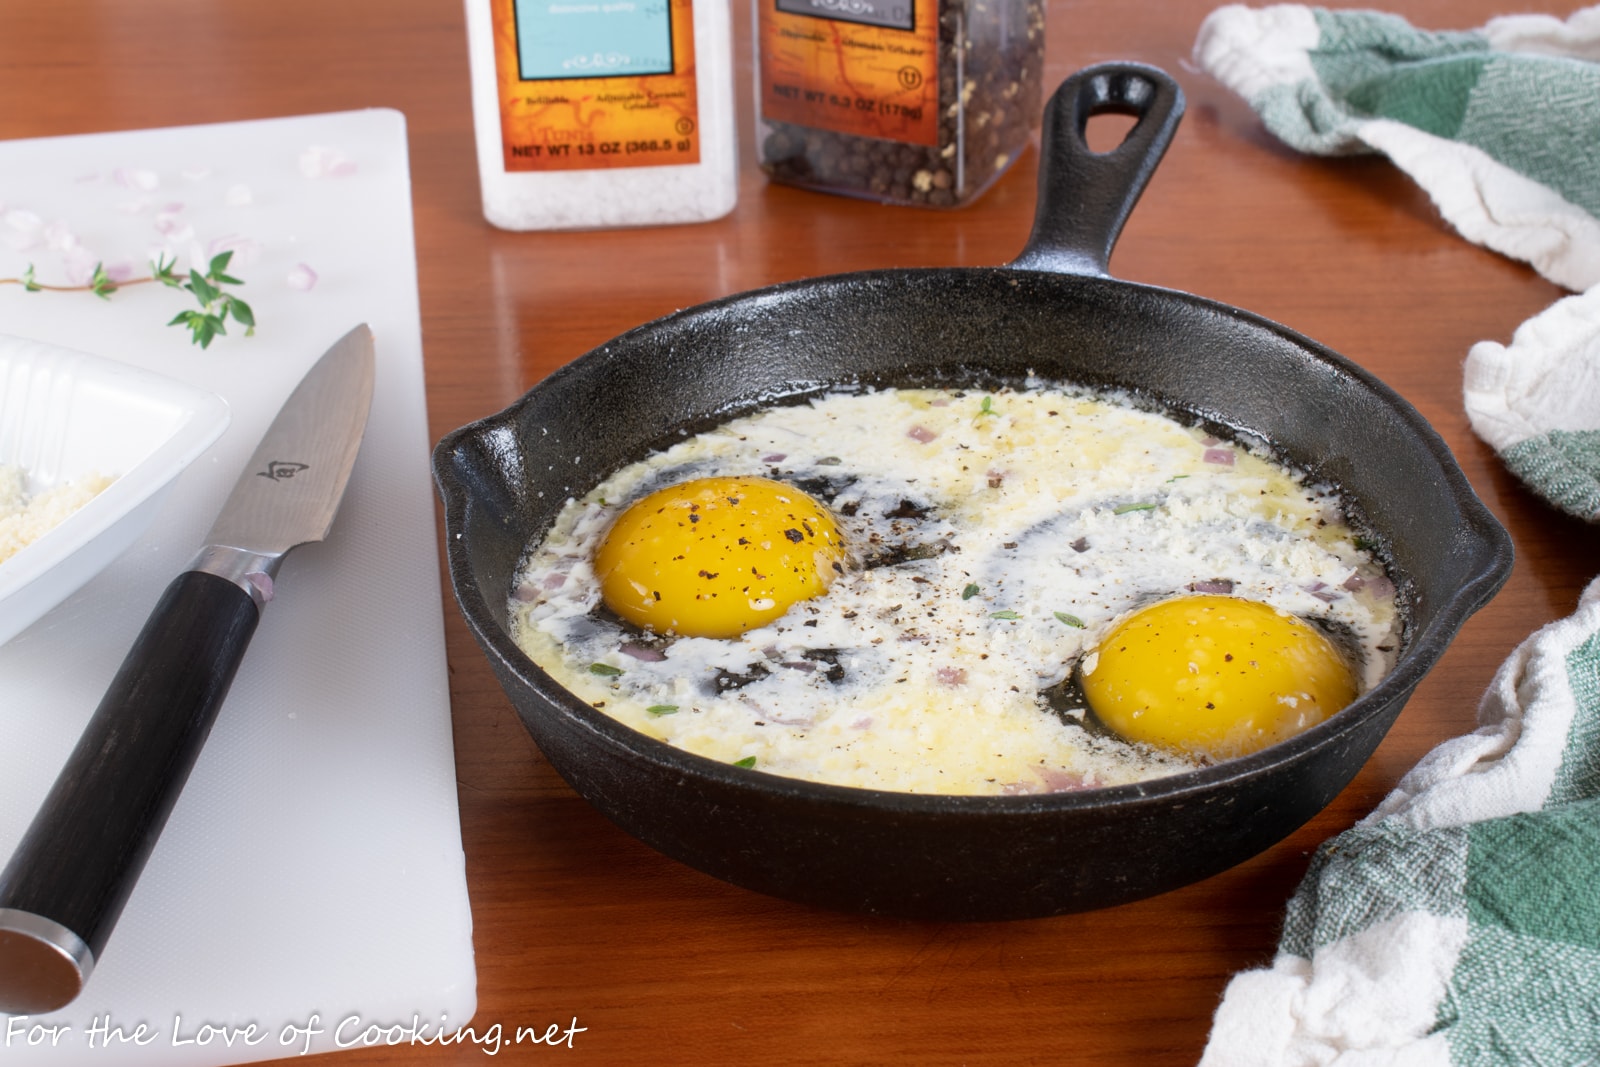 https://fortheloveofcooking-net.exactdn.com/wp-content/uploads/2019/02/Skillet-Baked-Eggs-with-Cream-and-Parmesan-5311.jpg?strip=all&lossy=1&quality=90&w=2560&ssl=1